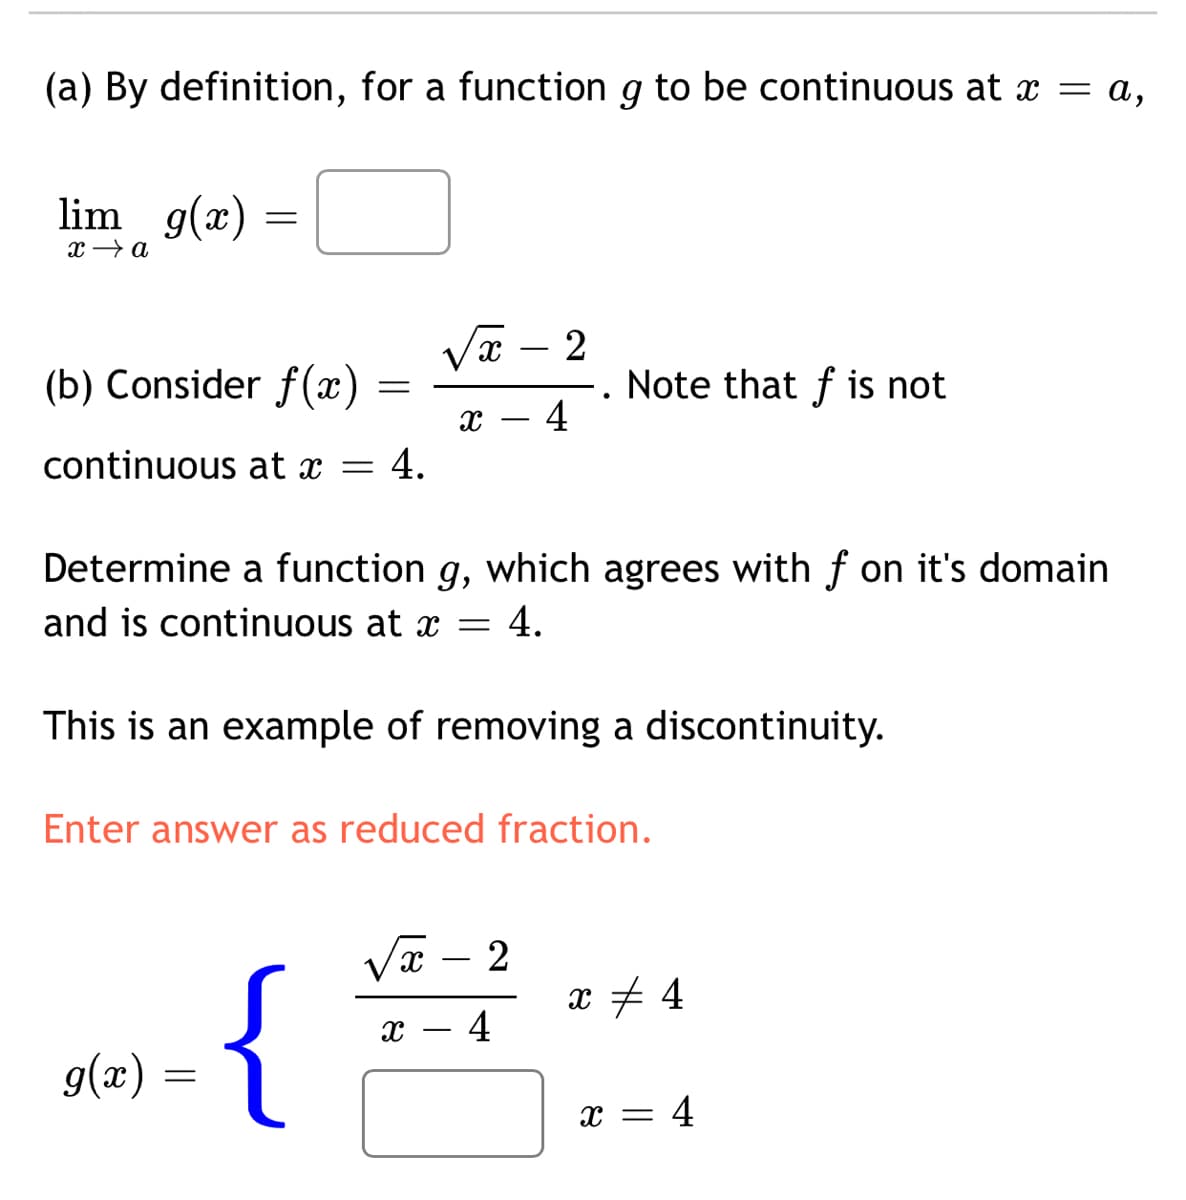 (a) By definition, for a function g to be continuous at x = a,
lim g(x)
Vx – 2
(b) Consider f(x)
Note that f is not
4
continuous at x =
4.
Determine a function g, which agrees with f on it's domain
and is continuous at x
4.
This is an example of removing a discontinuity.
Enter answer as reduced fraction.
-
{
- 4
g(x) =
х — 4
